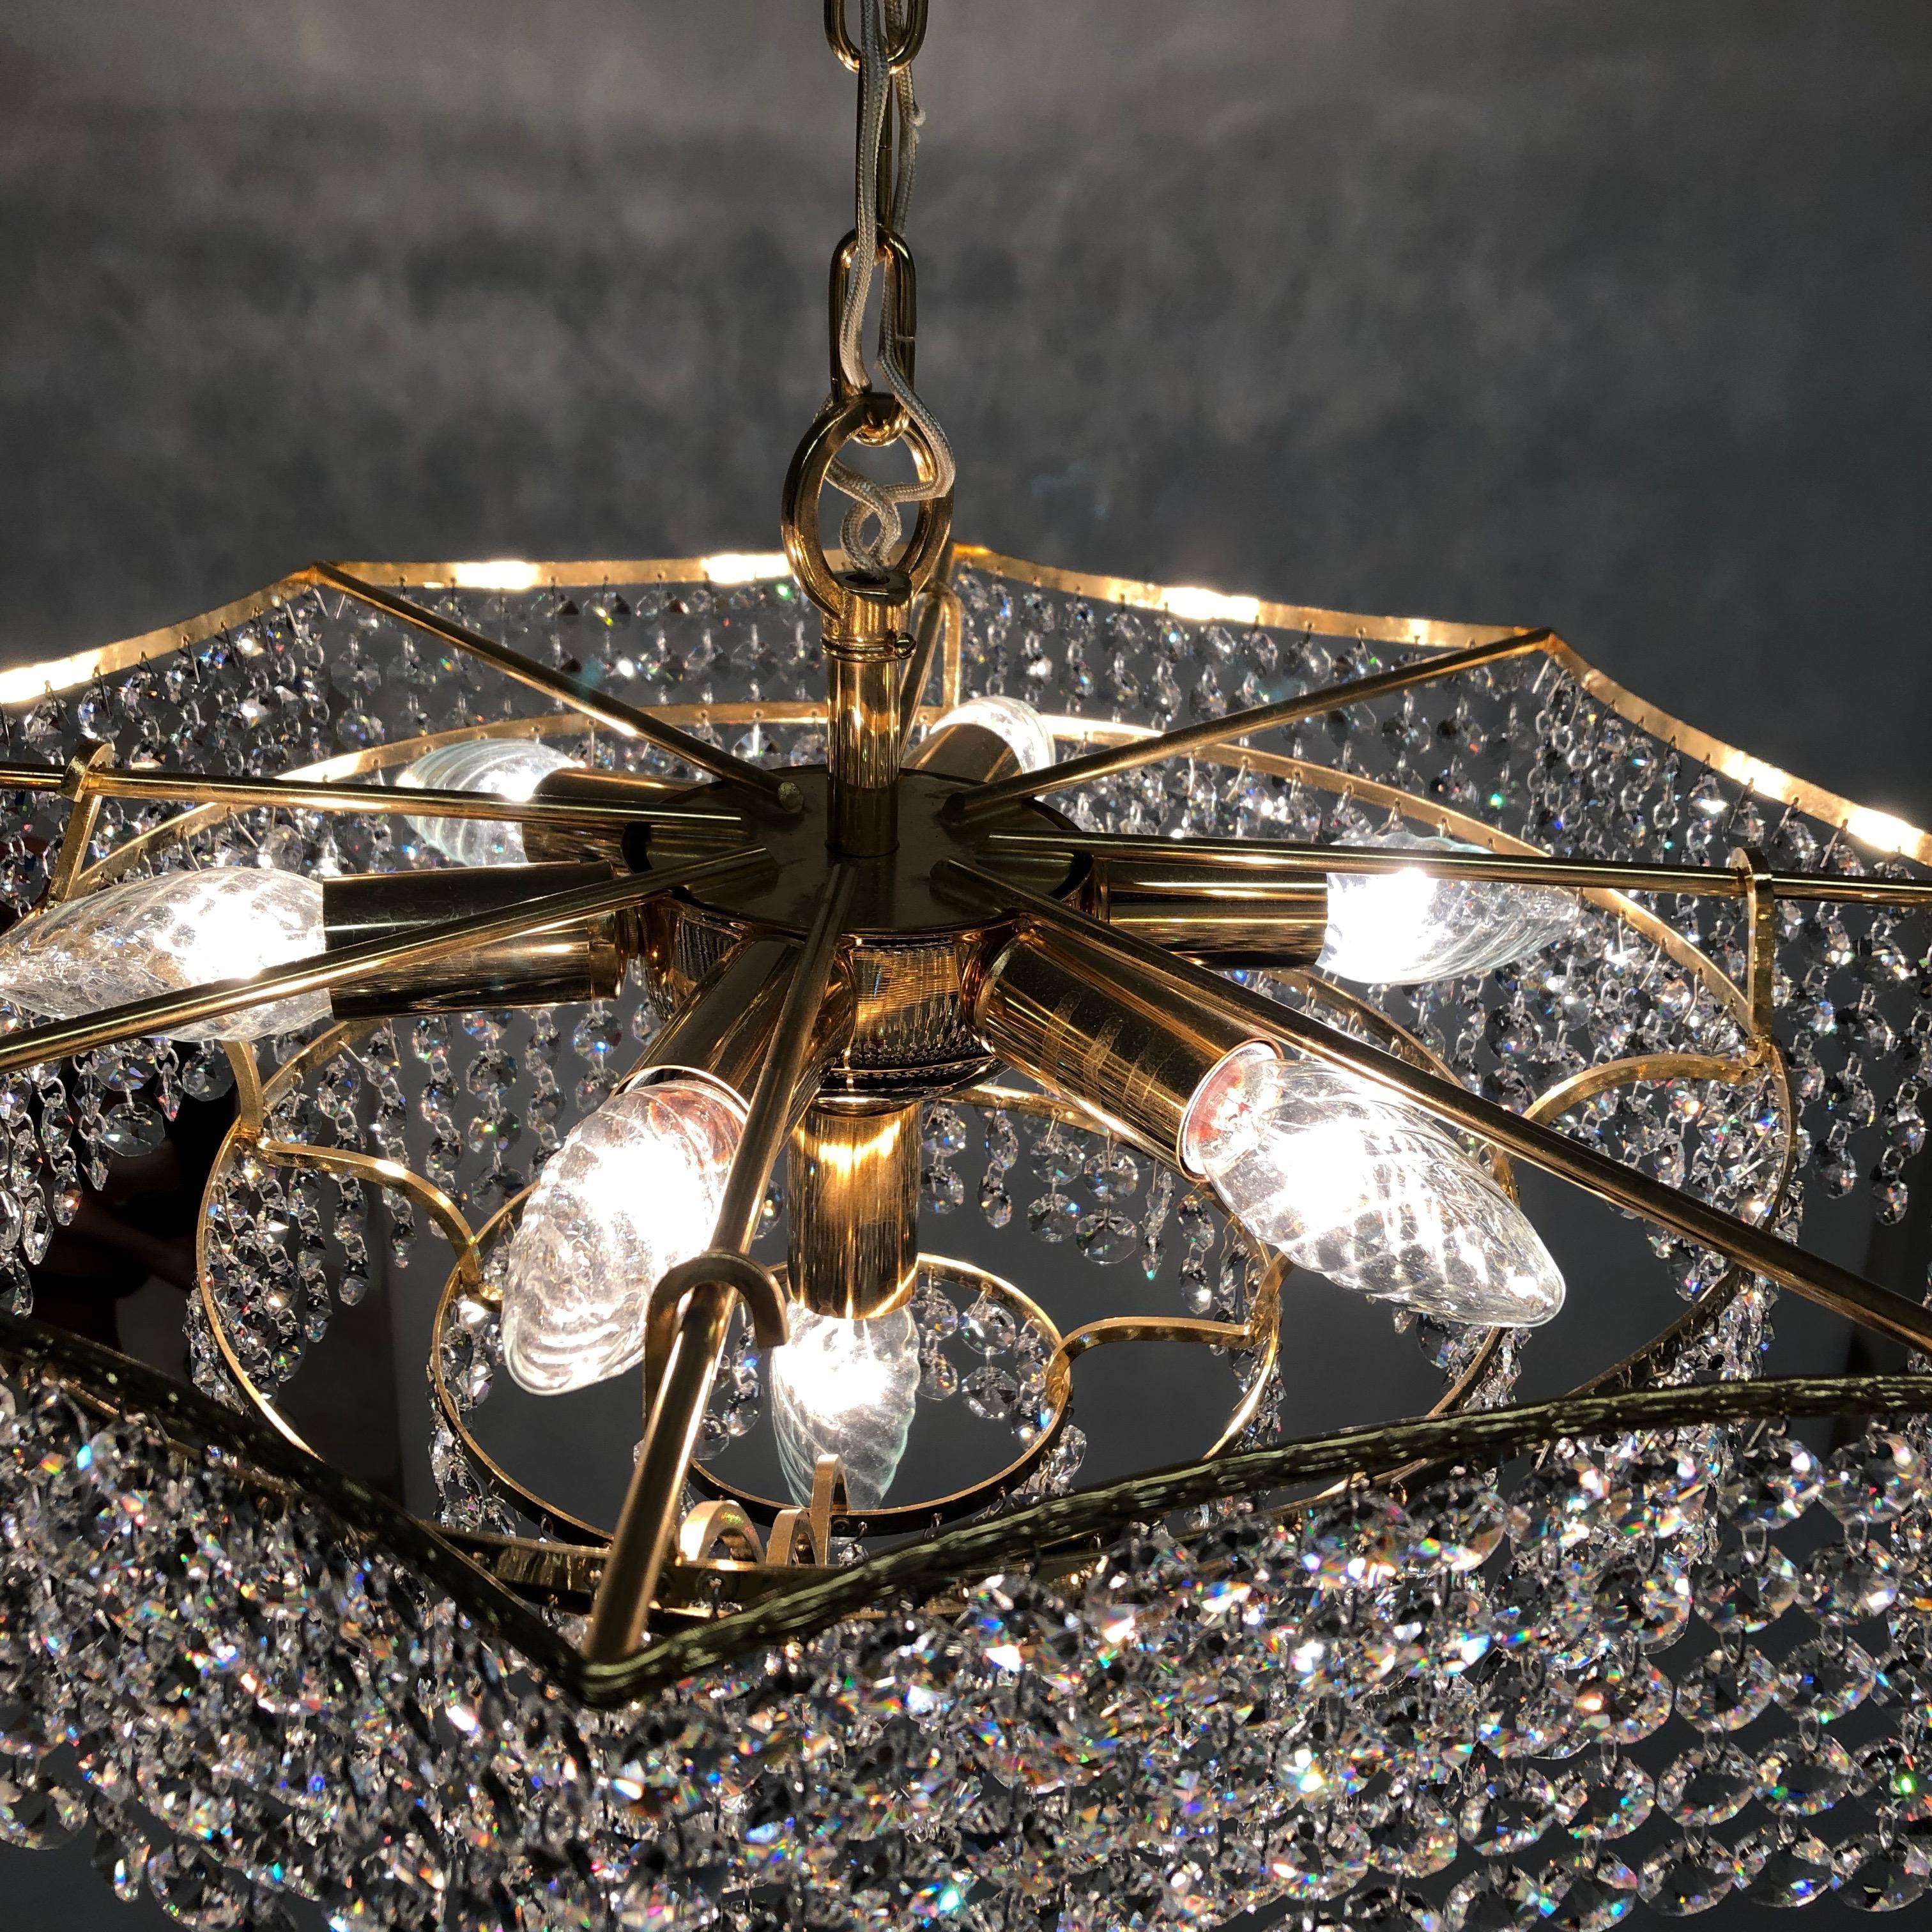 Brass and Crystal Glass Waterfall Chandelier, Richard Essig, Germany, 1960s For Sale 13